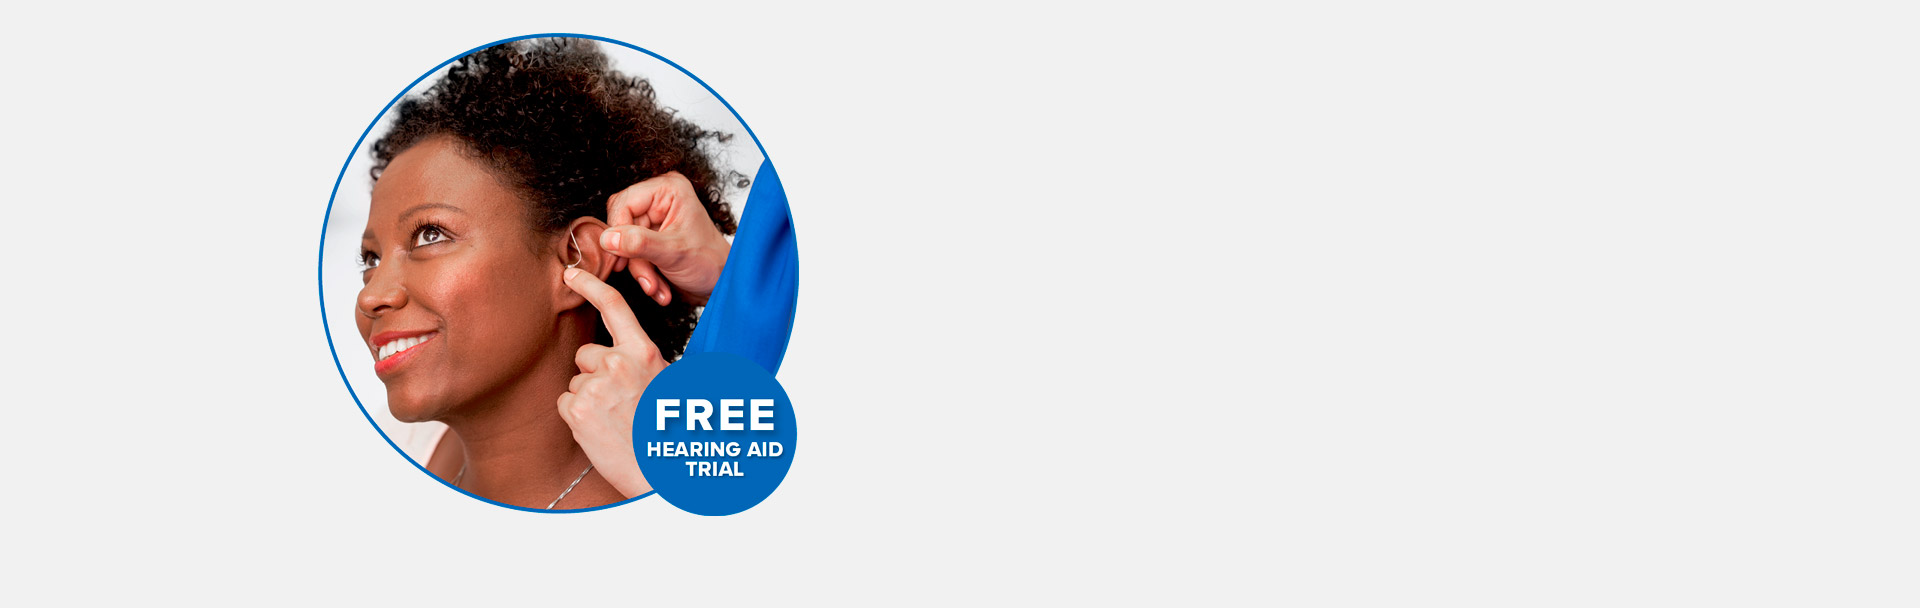 Image show Free hearing aid trial banner